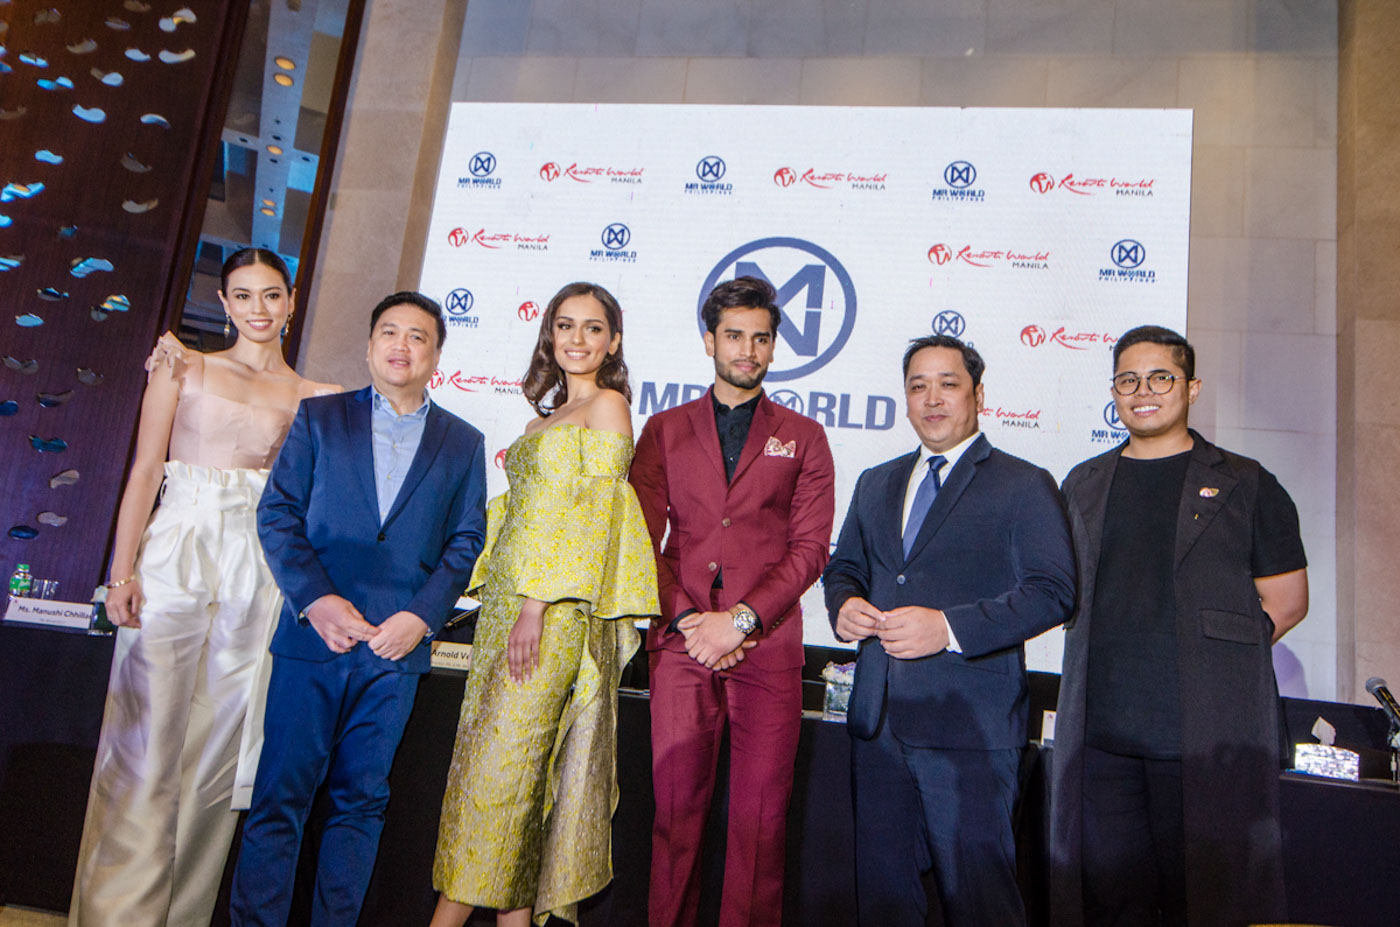 MR WORLD IN MANILA.  The Mr World competition is set to happen in the Philippines in January 2019 at Resorts World Manila. All photos by Rob Reyes/Rappler  